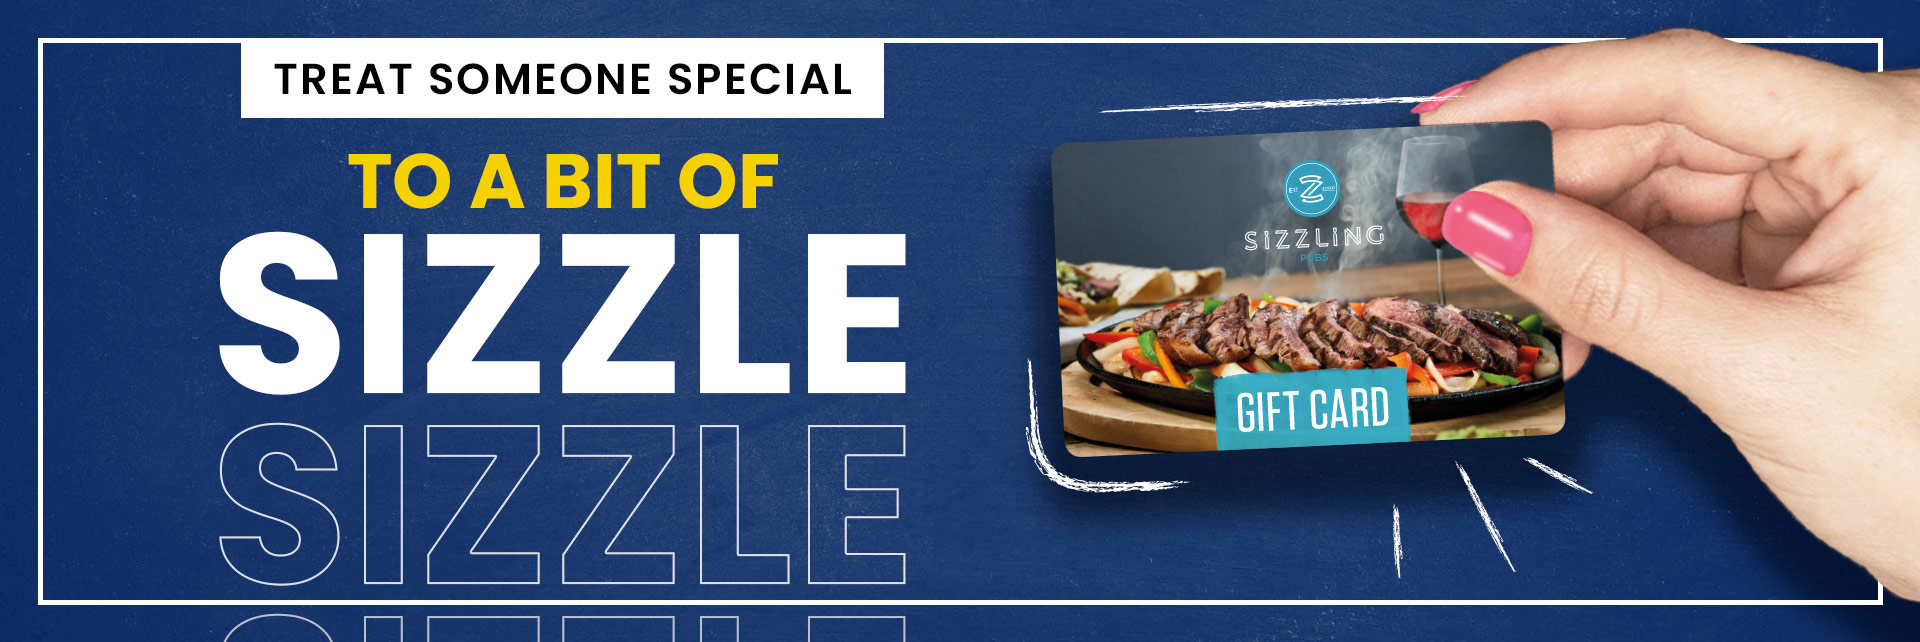 Sizzling Pubs Gift Card at The Oak and Acorn in Derby